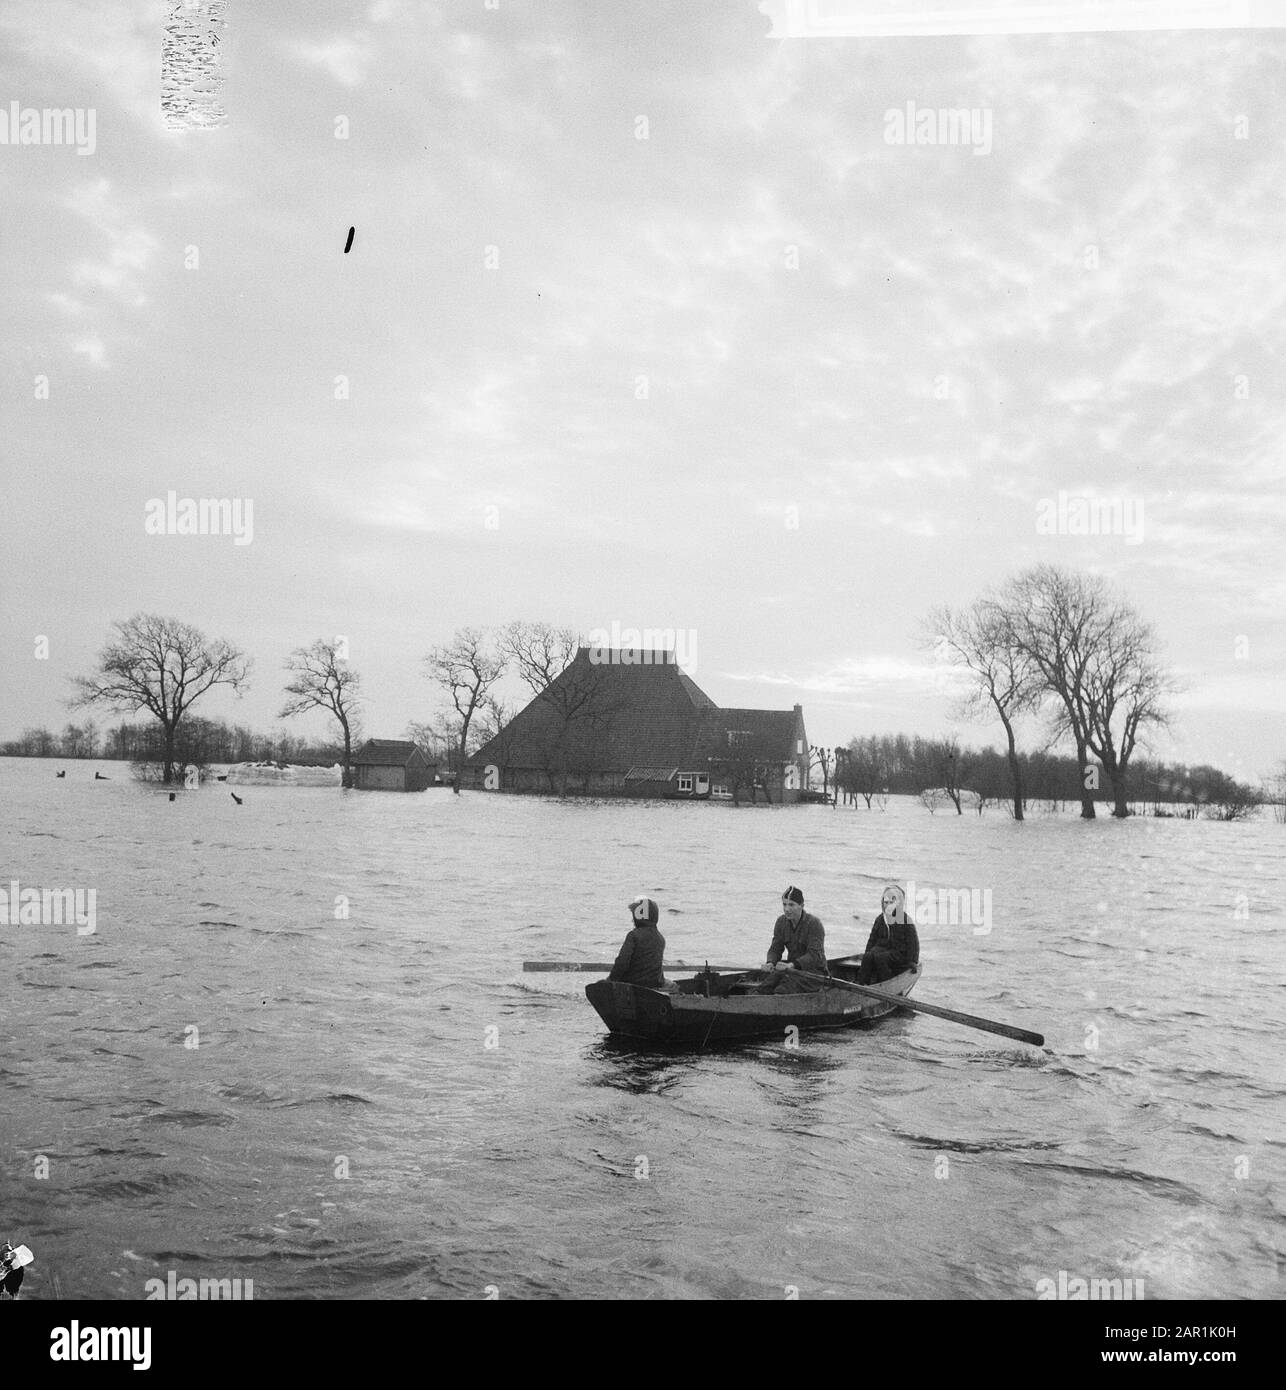 Flood in Friesland, family Oeneman in Alde Ouer near Joure must evacuate; children in a rowing boat on their way to a farm Date: 19 December 1965 Location: Friesland, Joure Keywords: farms, children, floods, rowing boats, waterlogging Stock Photo